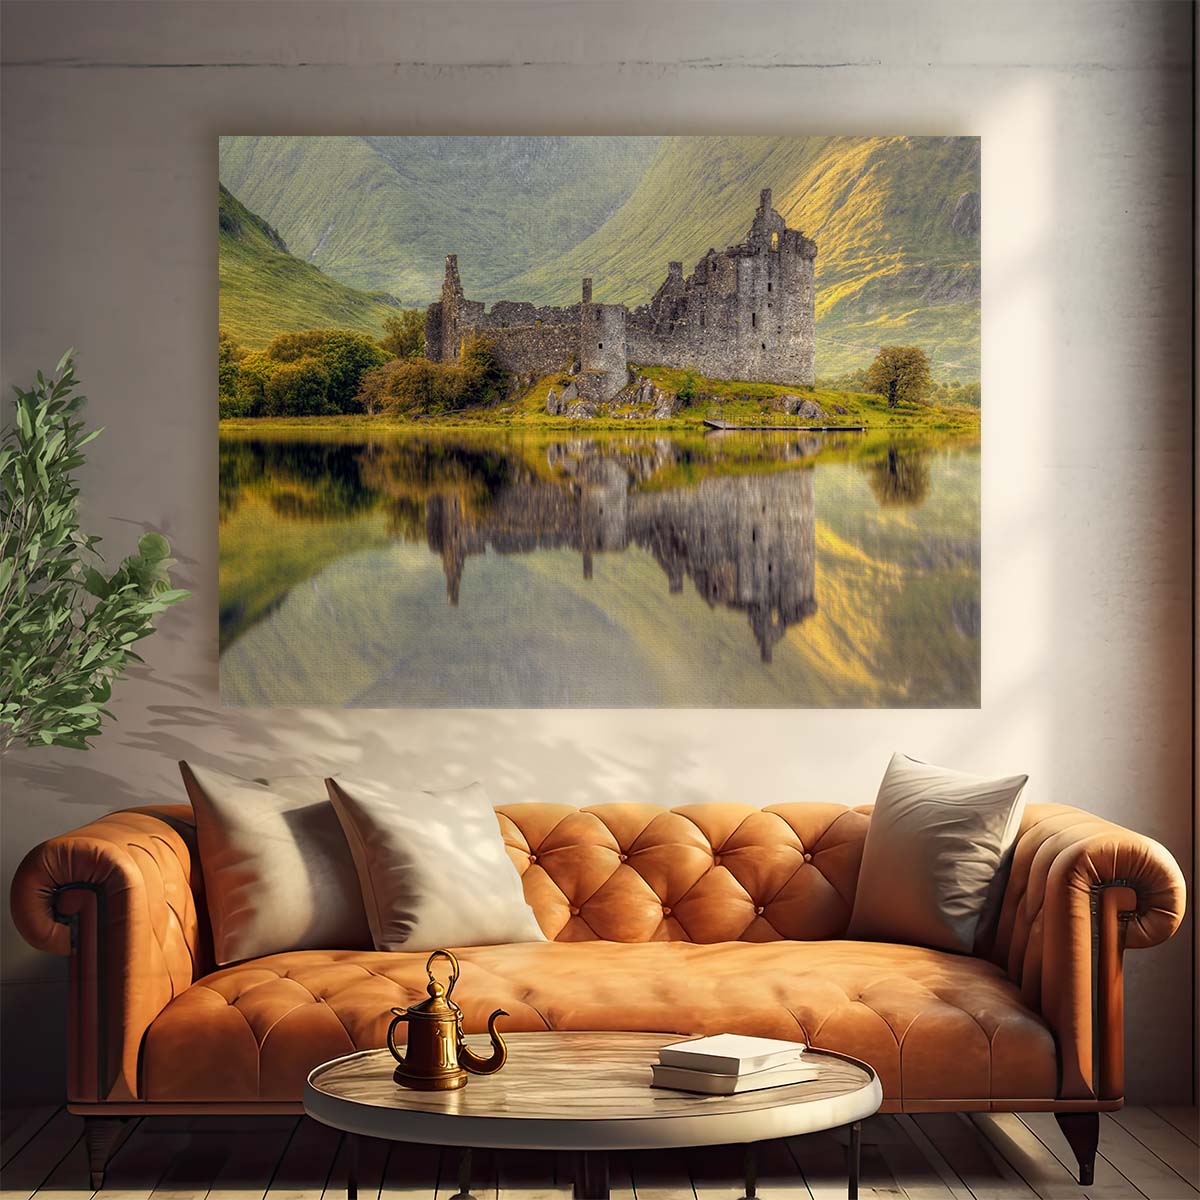 Kilchurn Castle Ruins Panoramic Wall Art, Scotland by Luxuriance Designs. Made in USA.